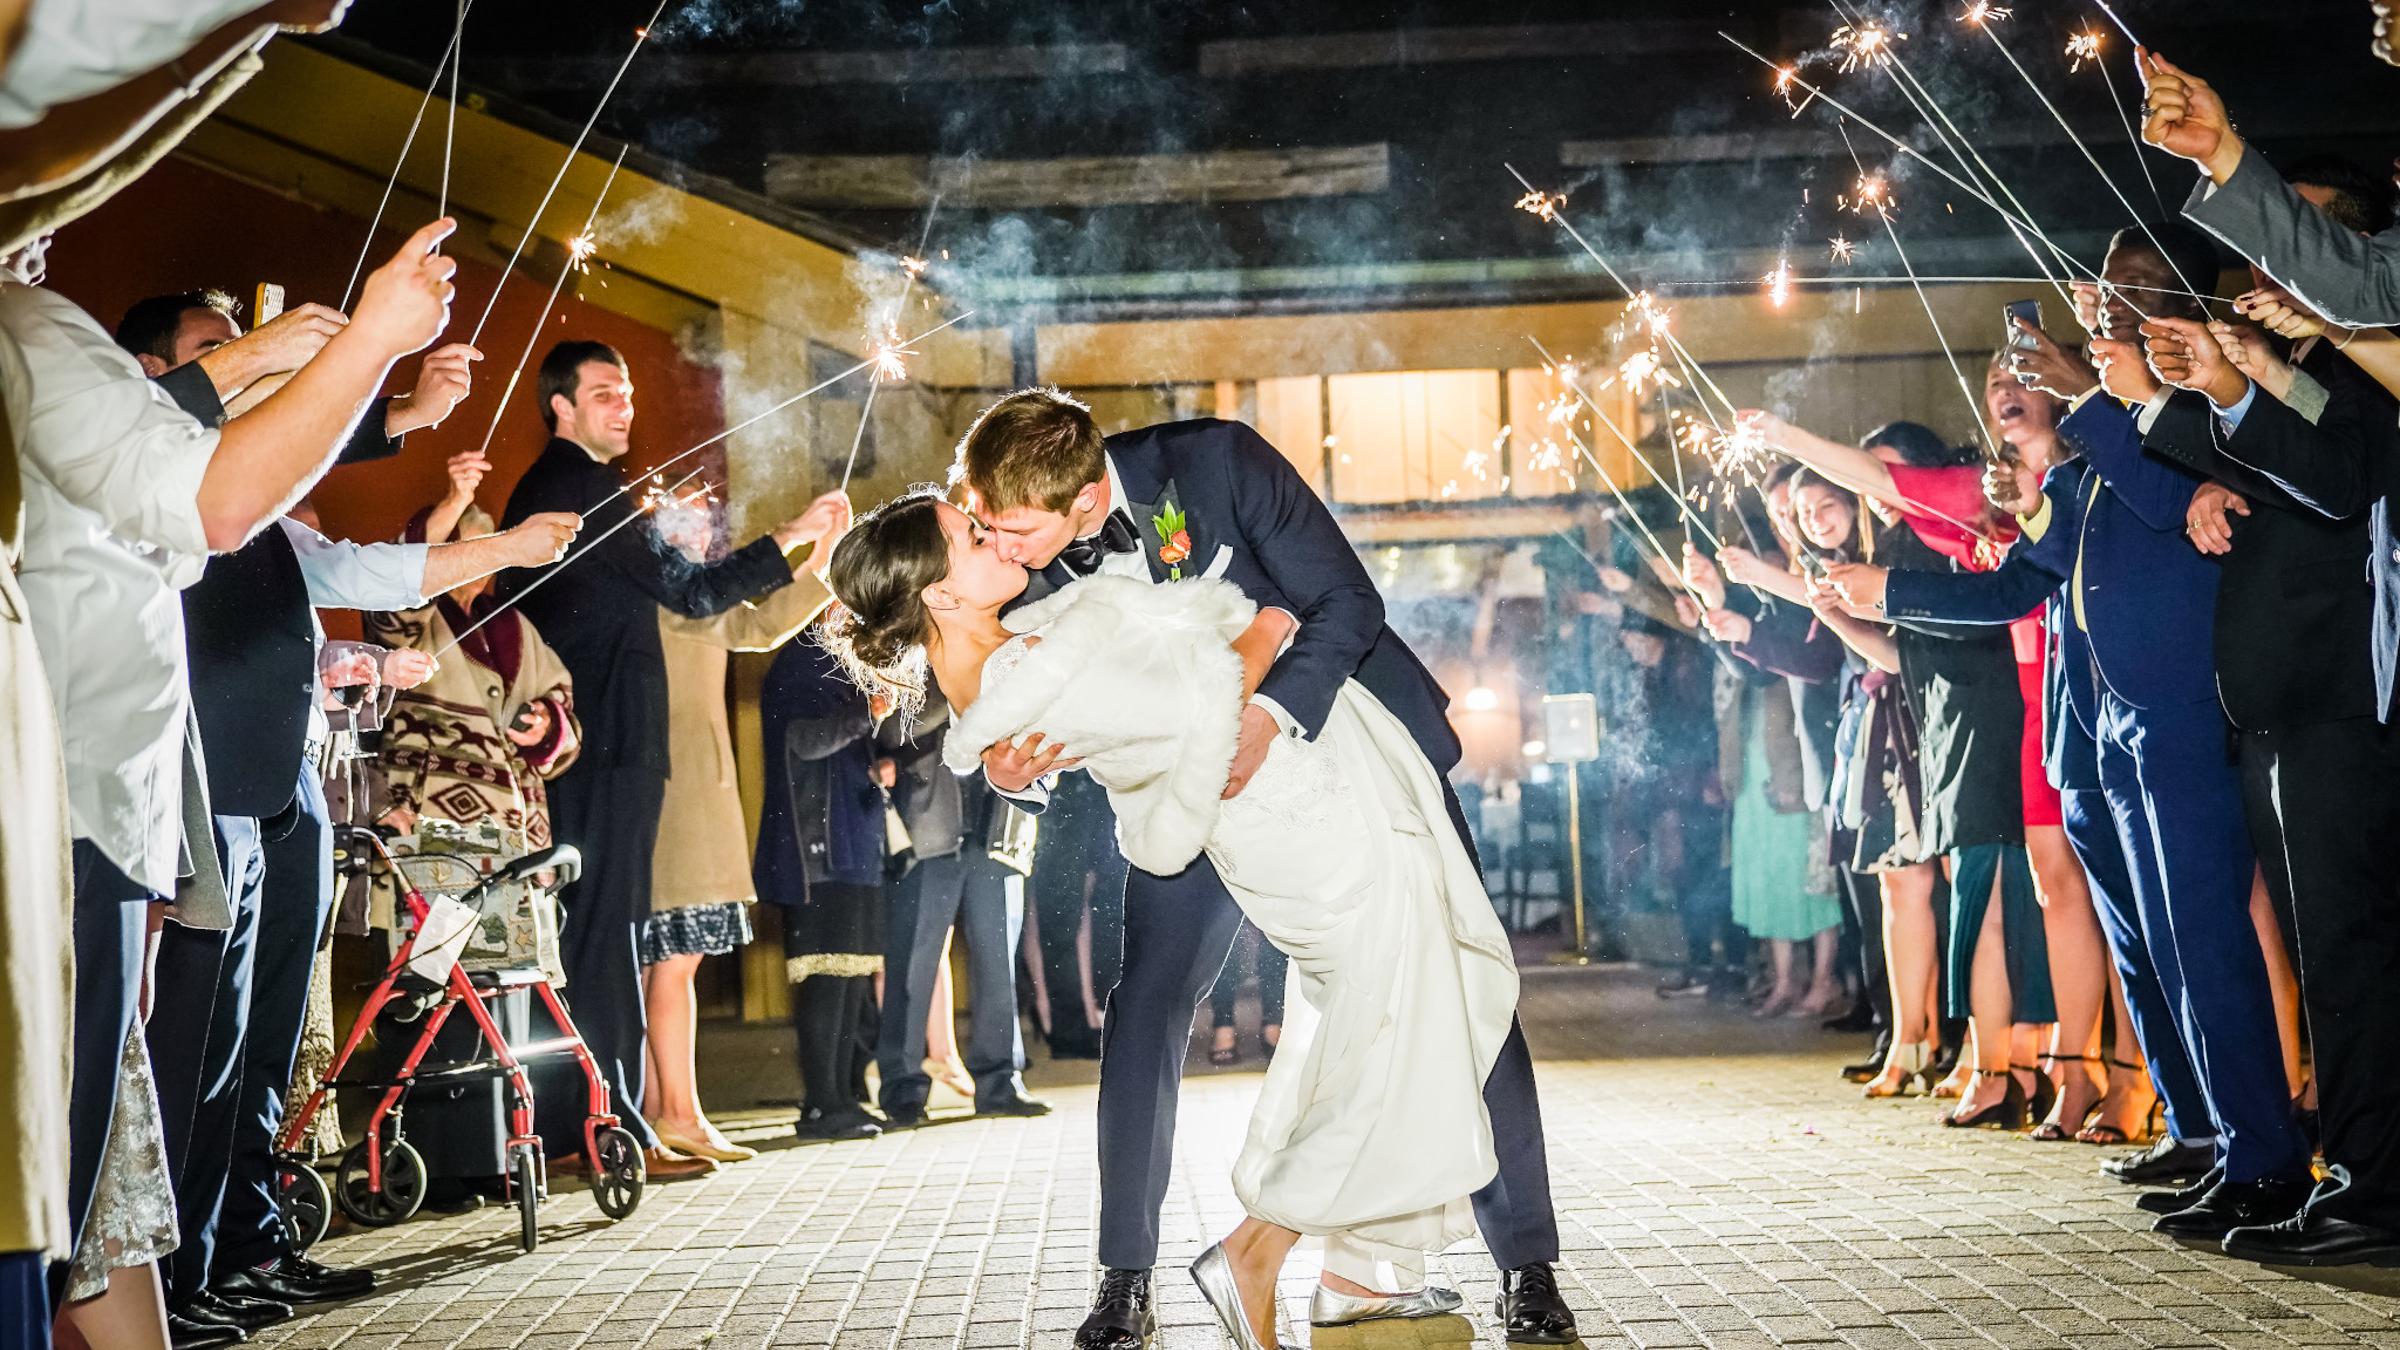 A bride and groom kissing around sparklers